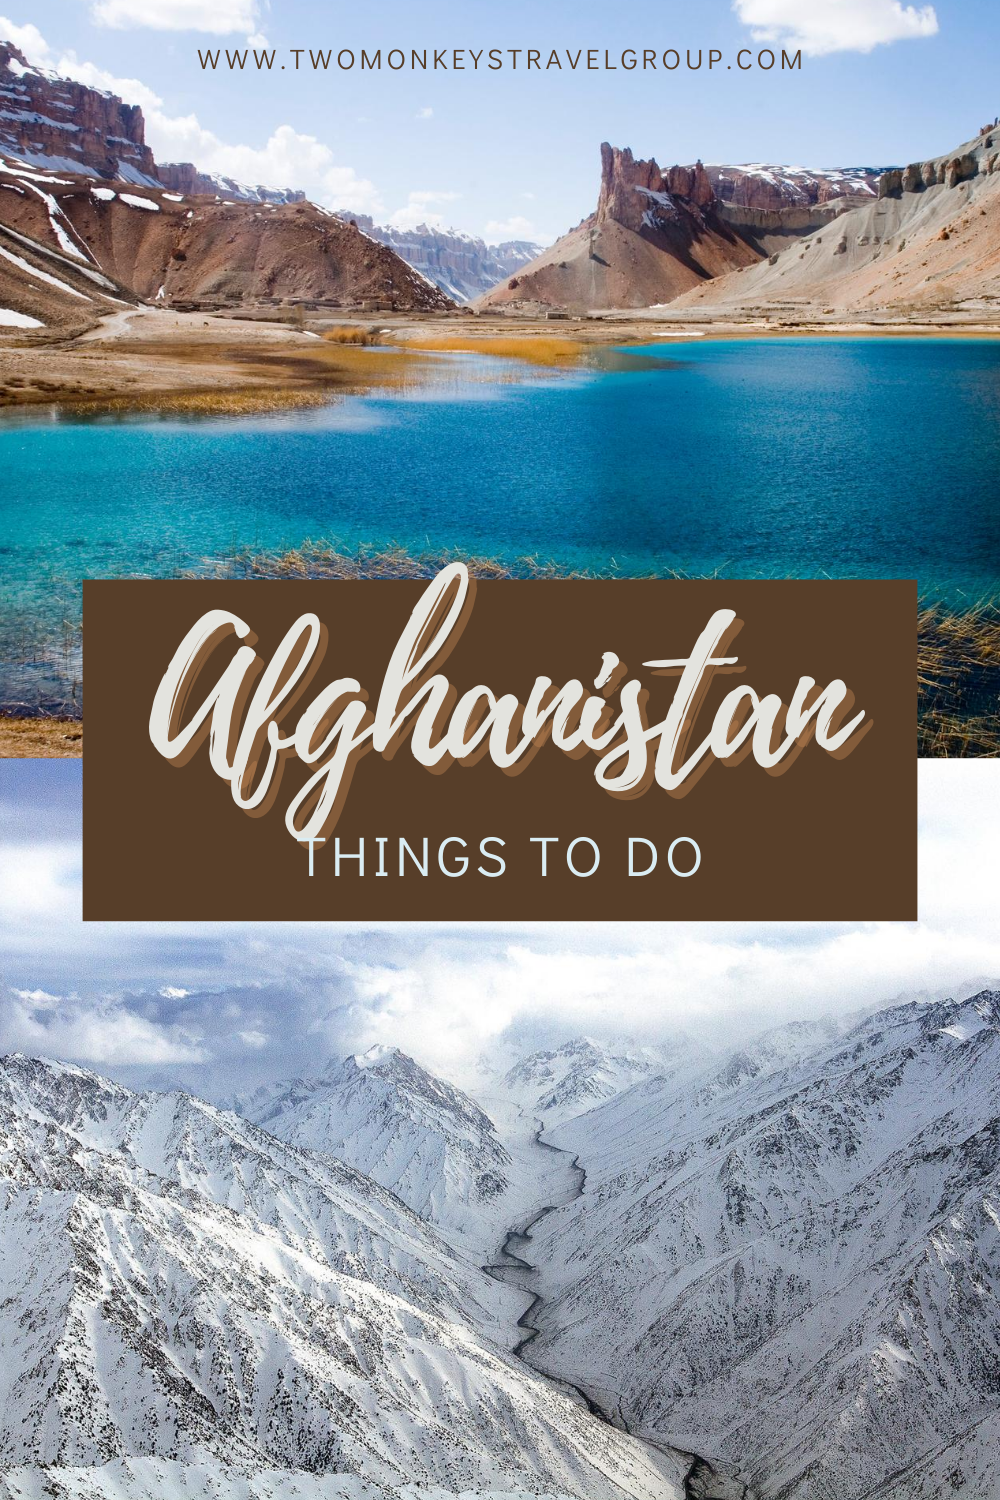 7 Things To Do in Afghanistan [Best Places to Visit in Afghanistan]